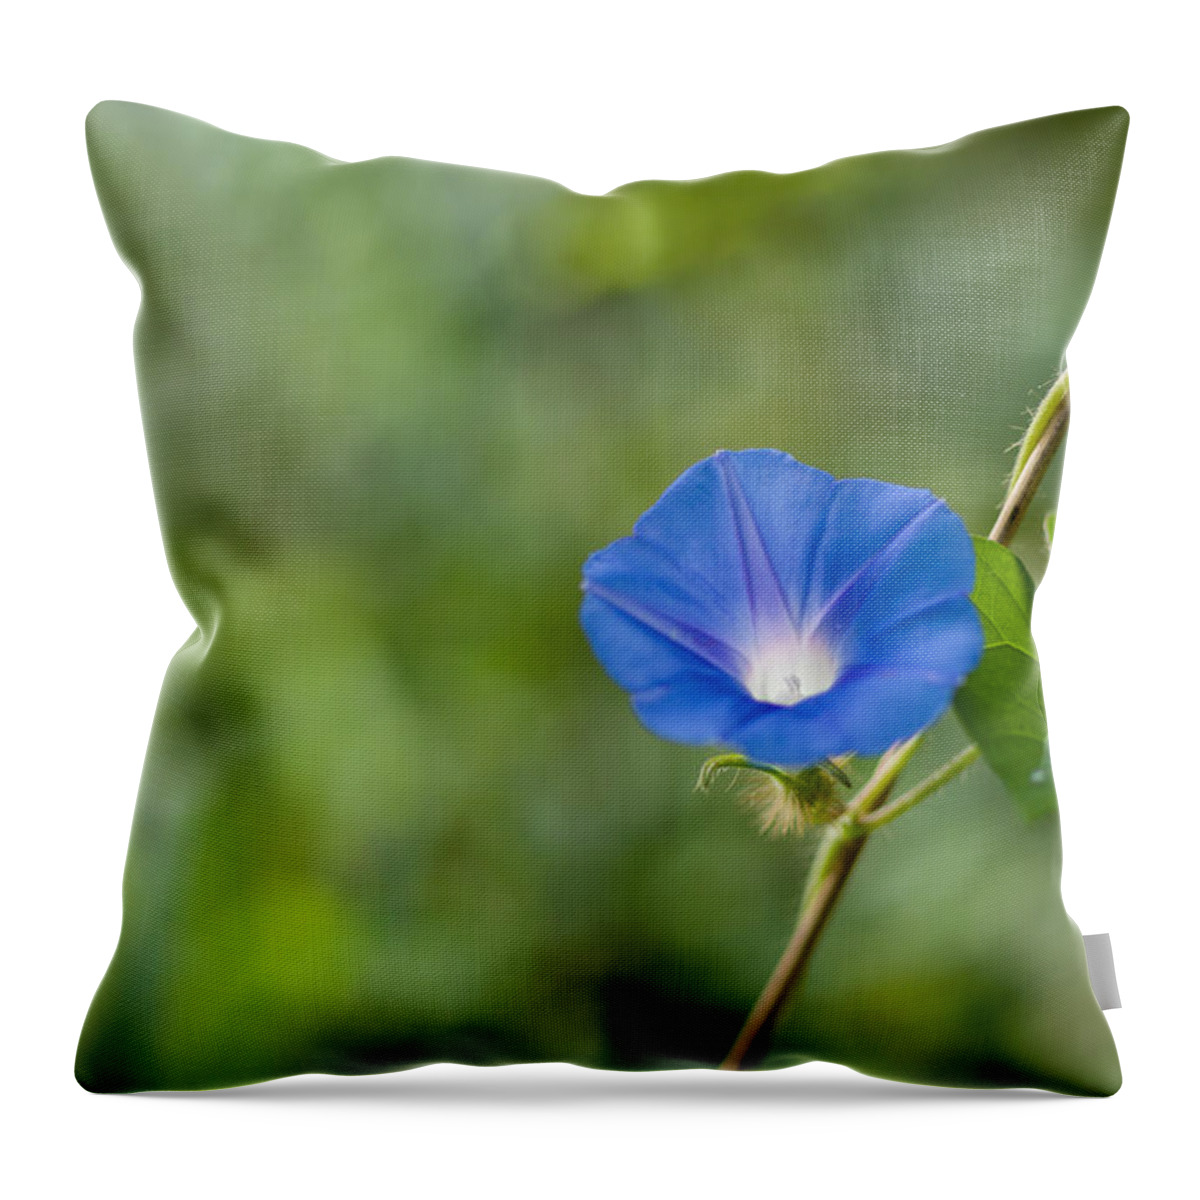 Da*55 1.4 Throw Pillow featuring the photograph Morning Glory by Lori Coleman